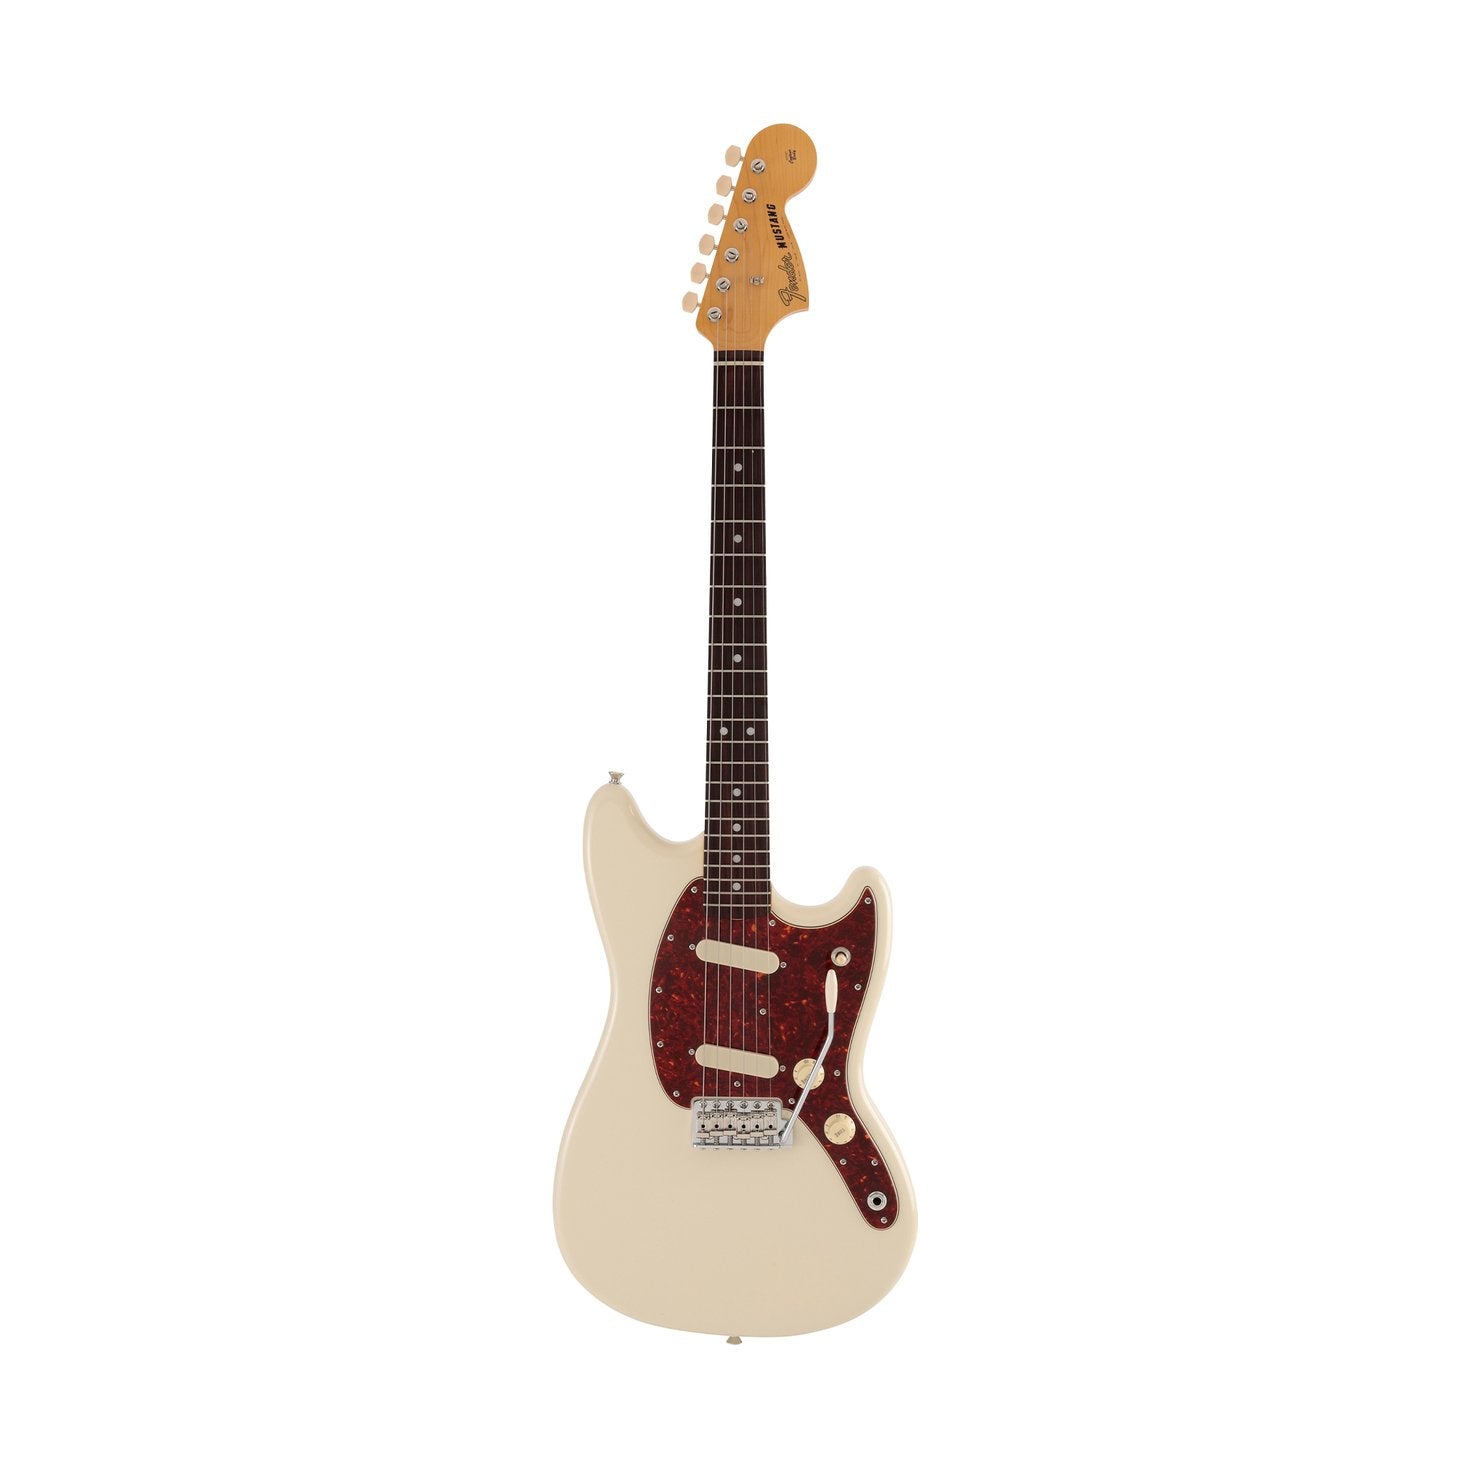 Fender Japan CHAR Signature Mustang Electric Guitar, RW FB, Olympic White, FENDER, ELECTRIC GUITAR, fender-electric-guitar-f03-565-2600-305, ZOSO MUSIC SDN BHD